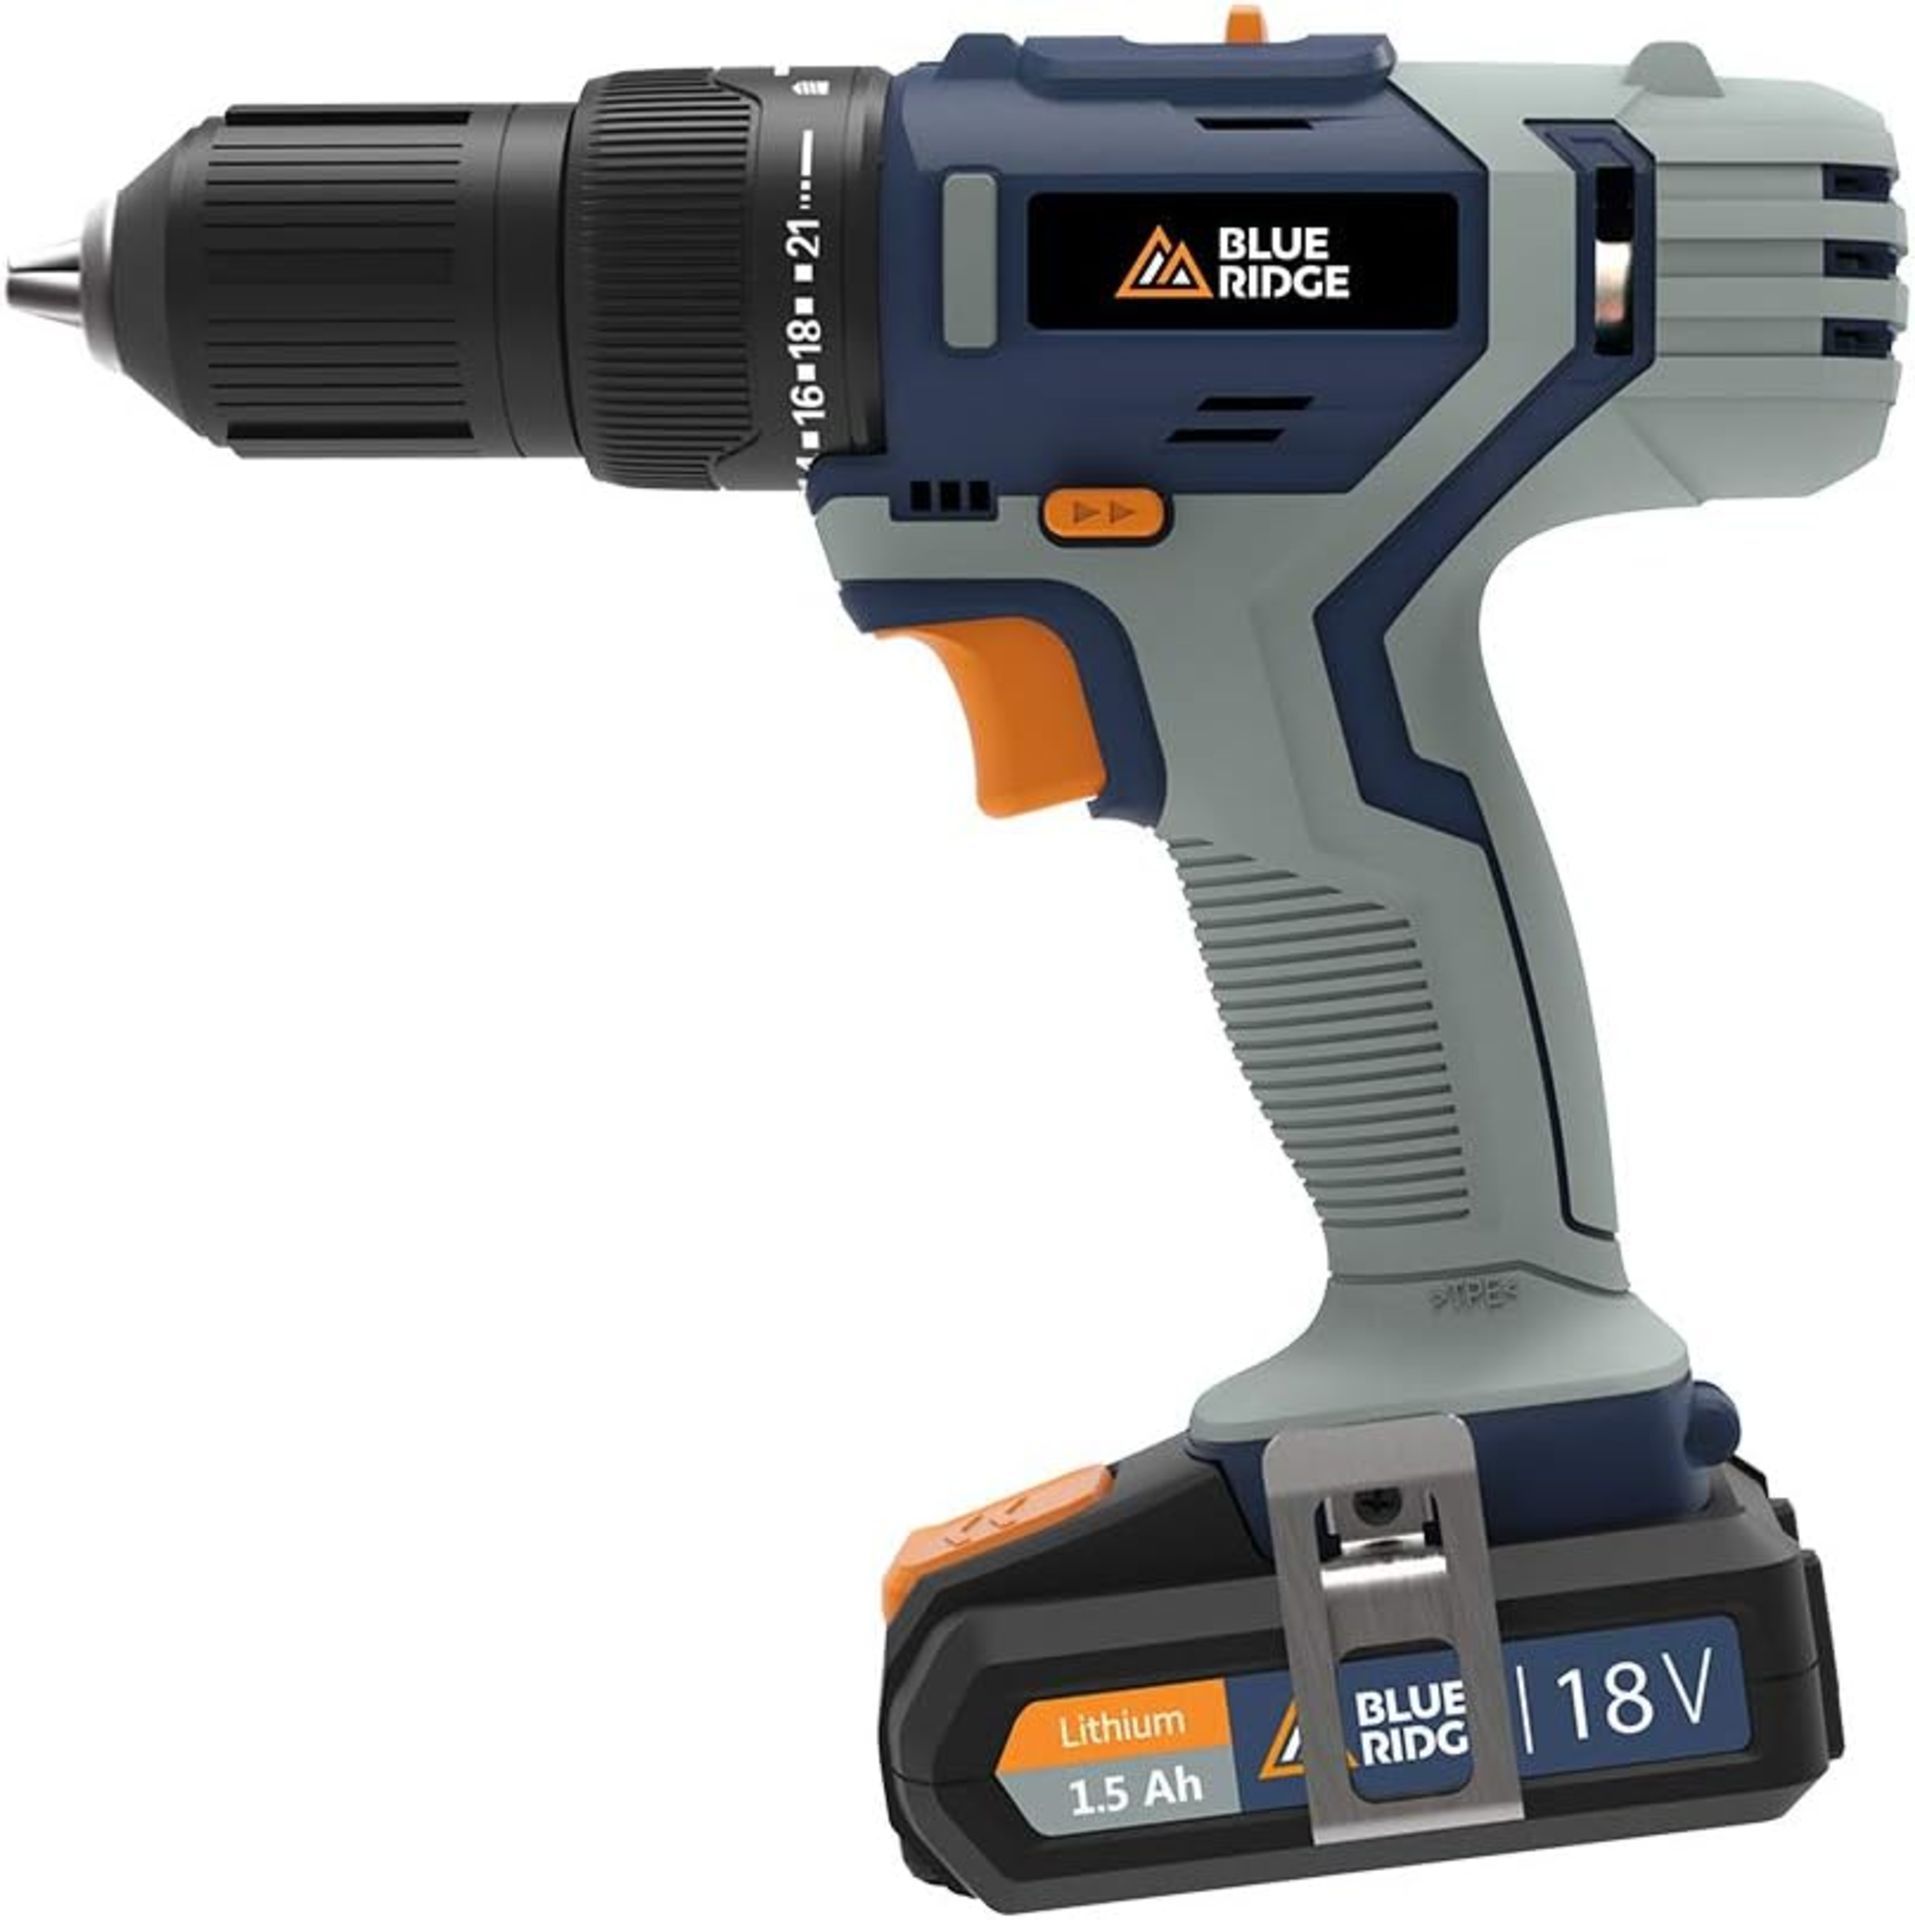 TRADE LOT TO CONTAIN 10x NEW & BOXED BLUE RIDGE 18V Cordless Hammer Drill with 2 x 1.5 Ah Li-ion - Image 2 of 3